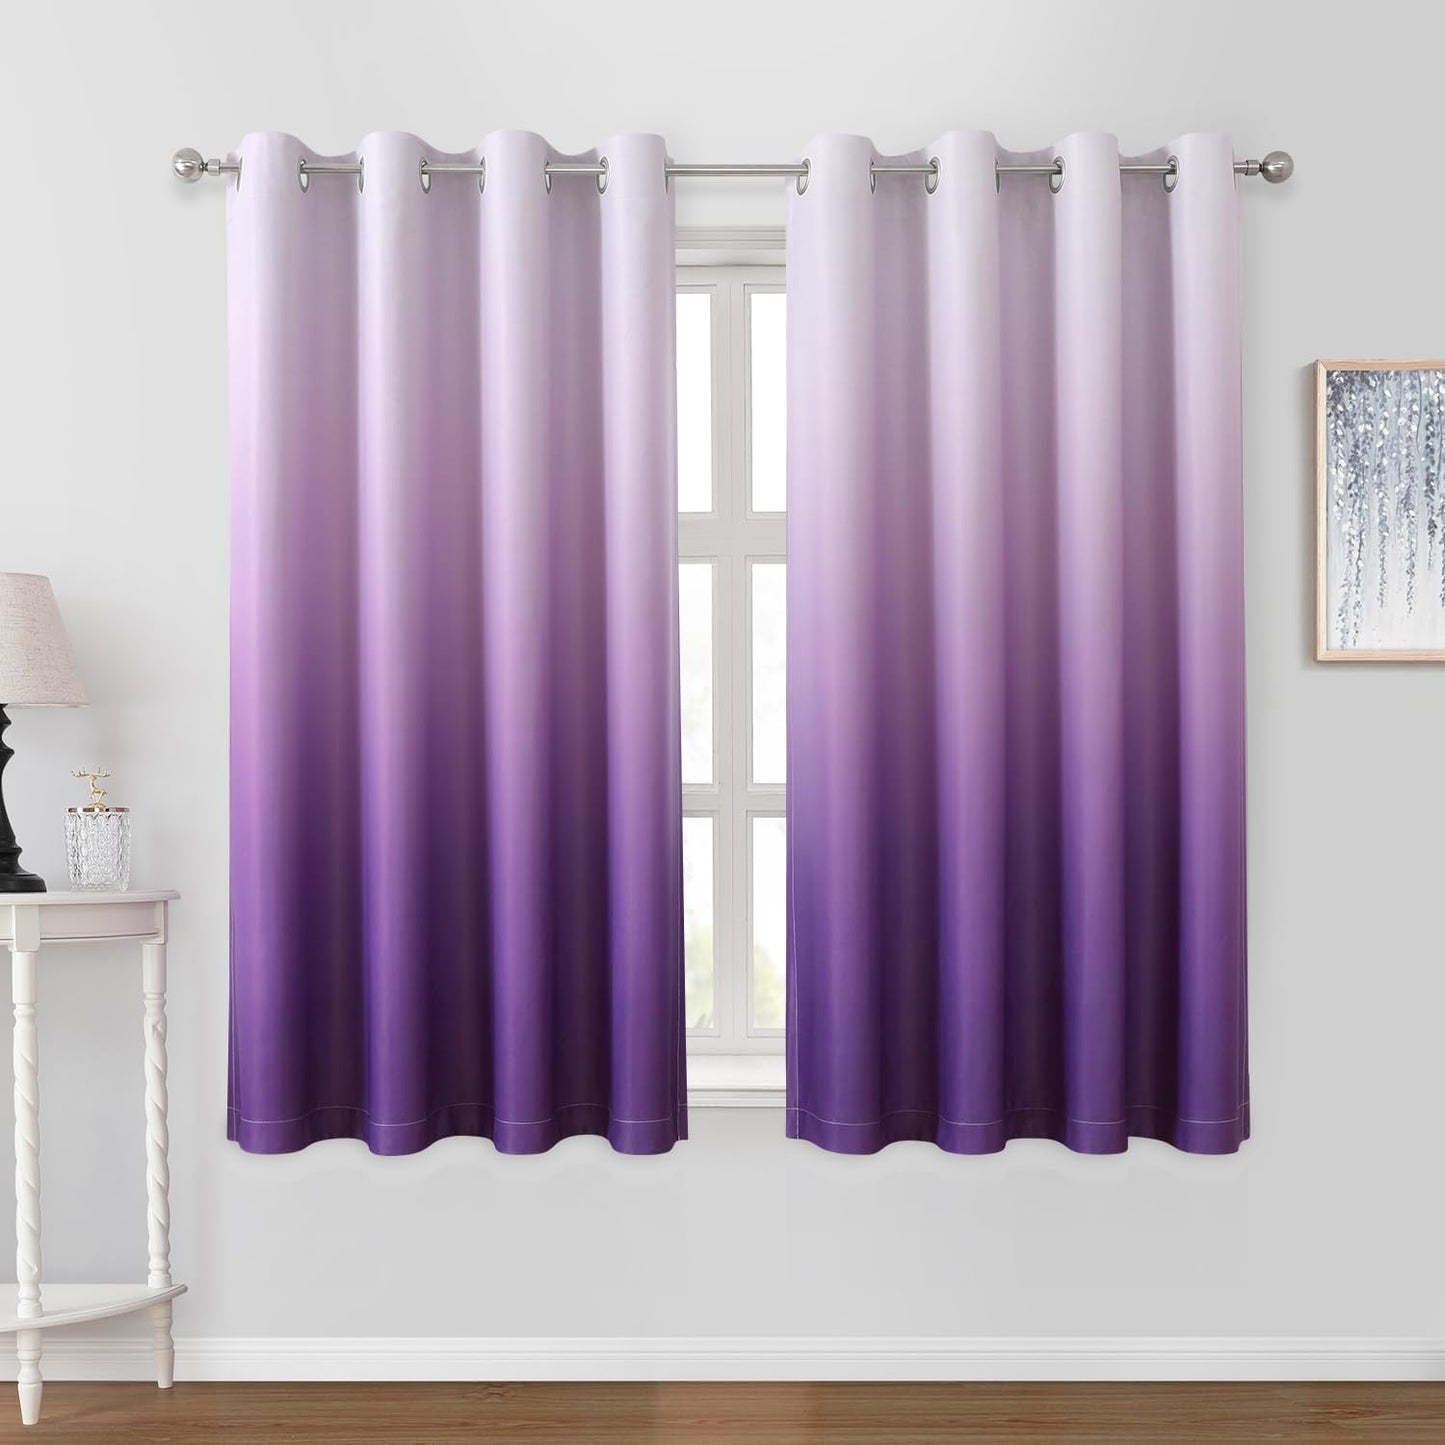 HOMEIDEAS Navy Blue Ombre Blackout Curtains 52 X 84 Inch Length Gradient Room Darkening Thermal Insulated Energy Saving Grommet 2 Panels Window Drapes for Living Room/Bedroom  HOMEIDEAS Purple 52"W X 63"L 